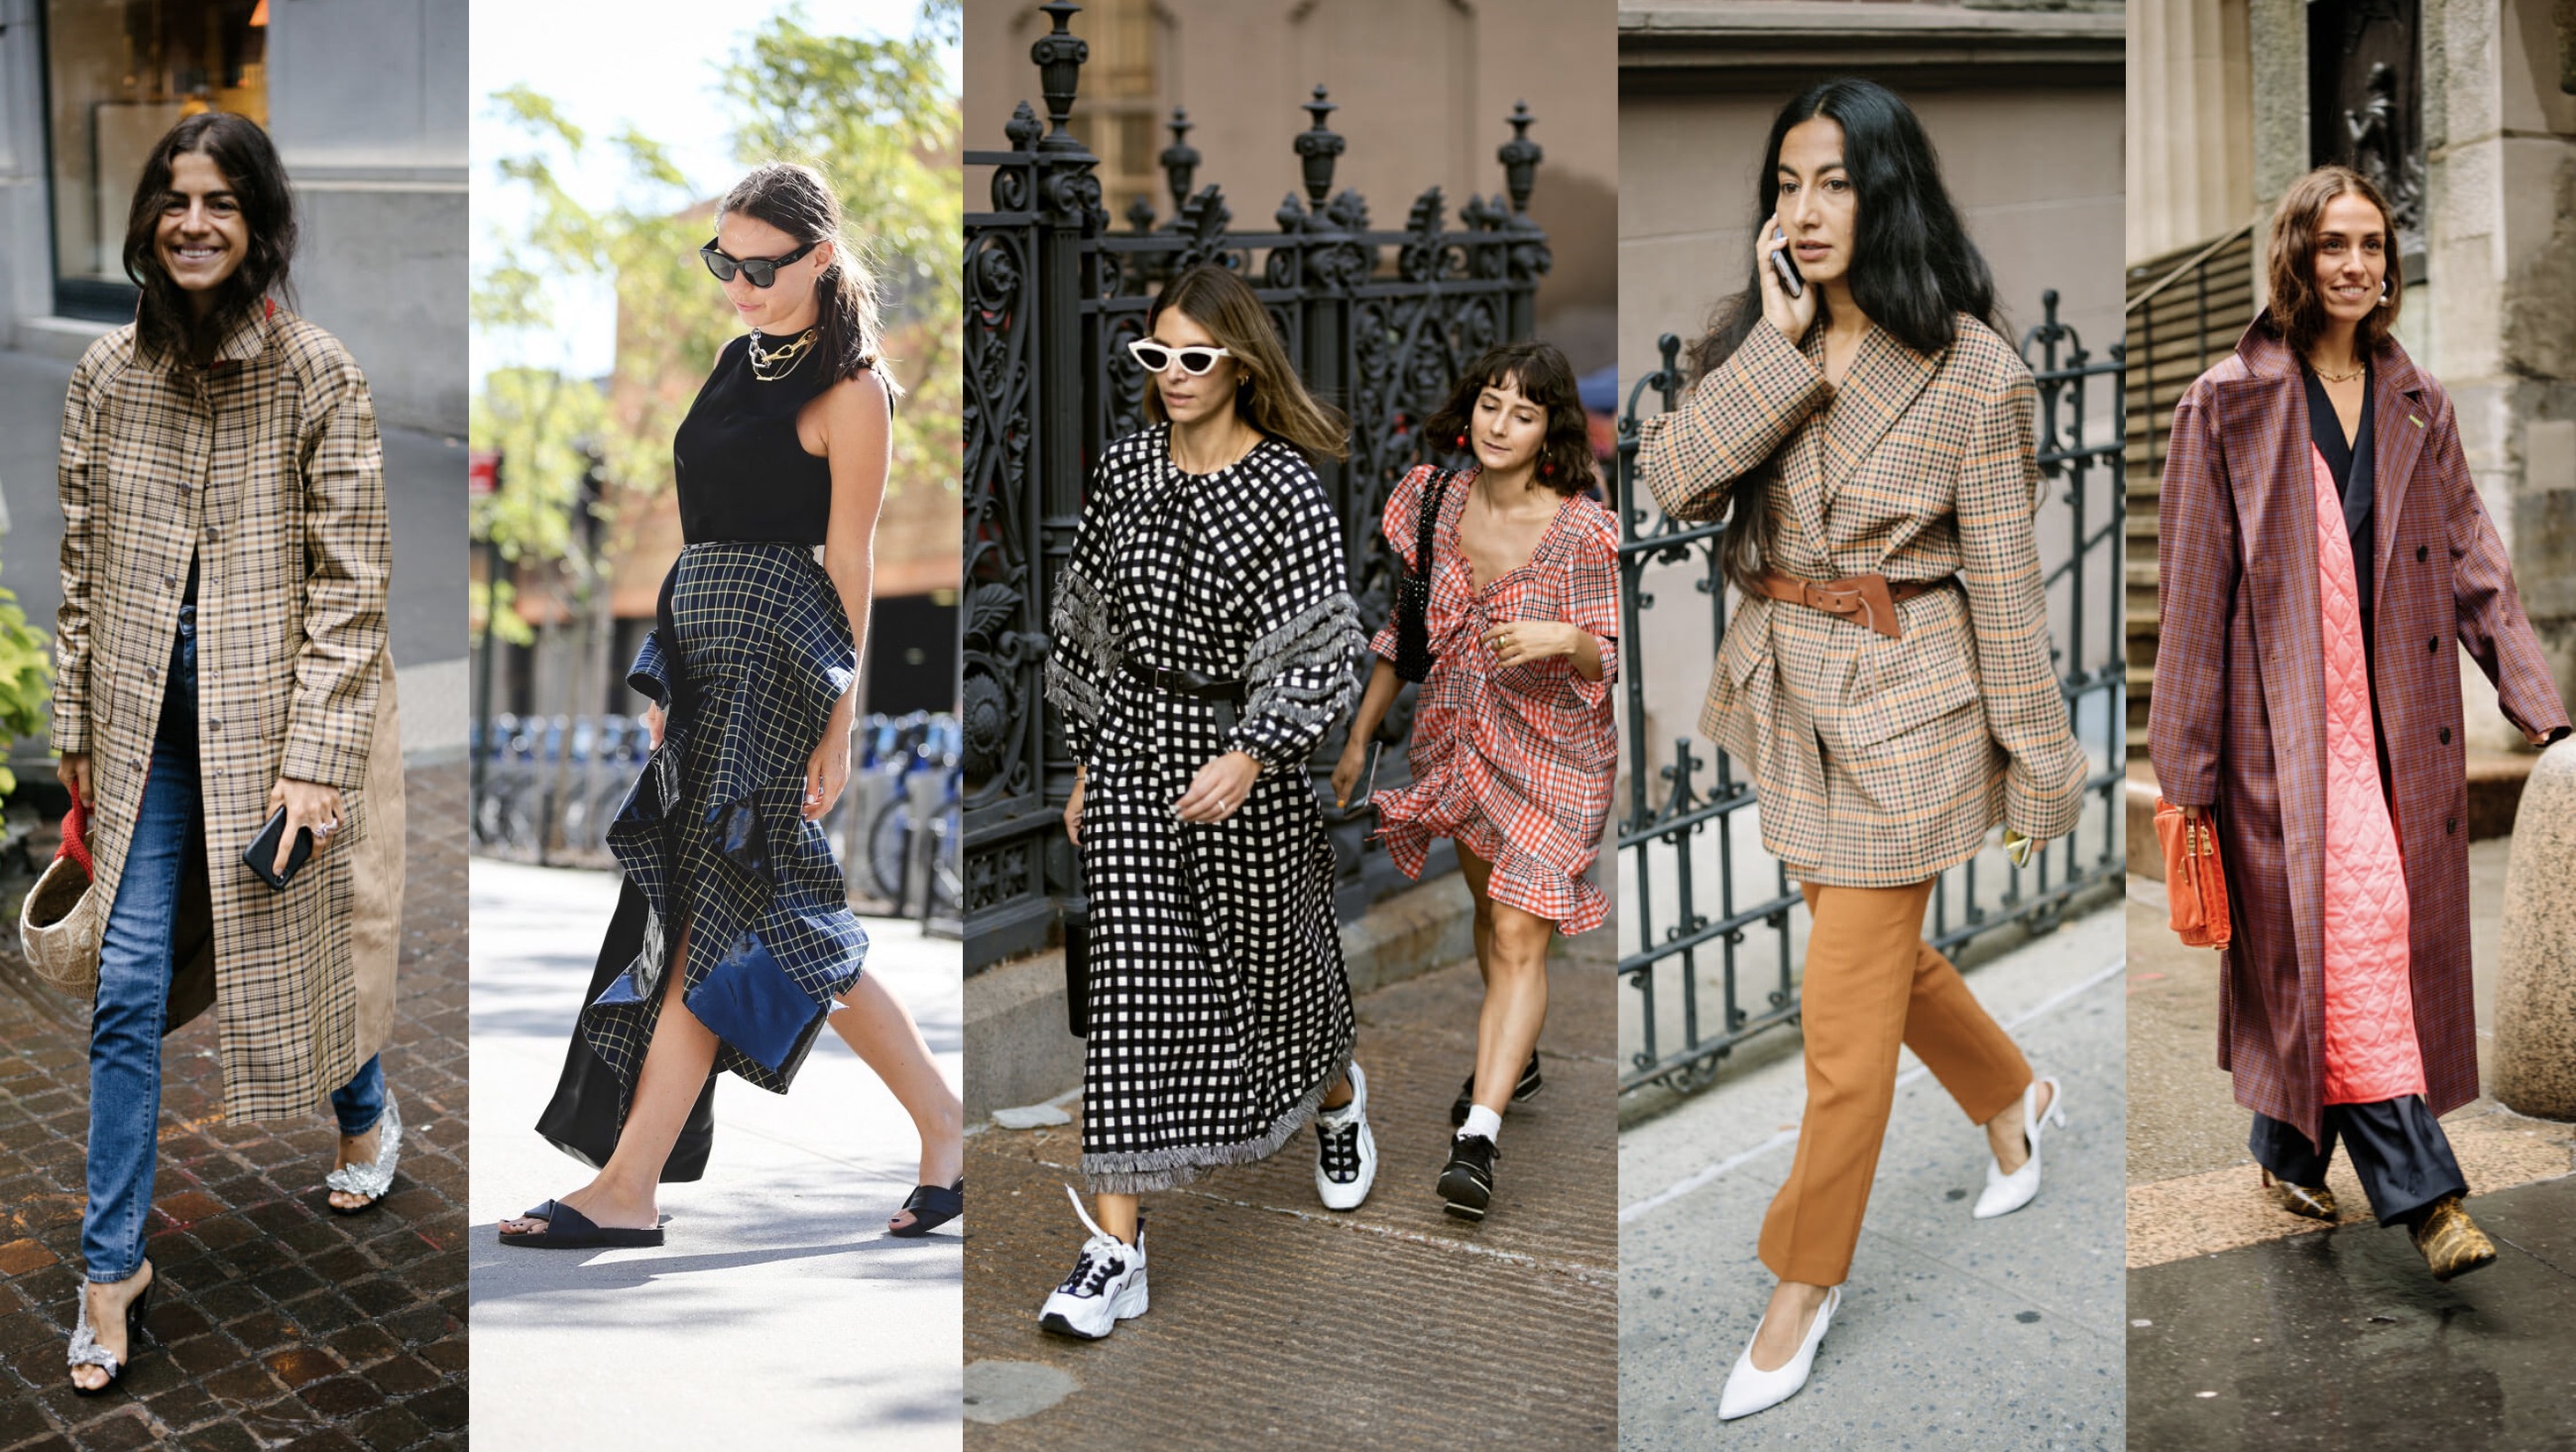 The Grey Edit-NYFW Street Style Looks by Trend-Plaid on Plaid